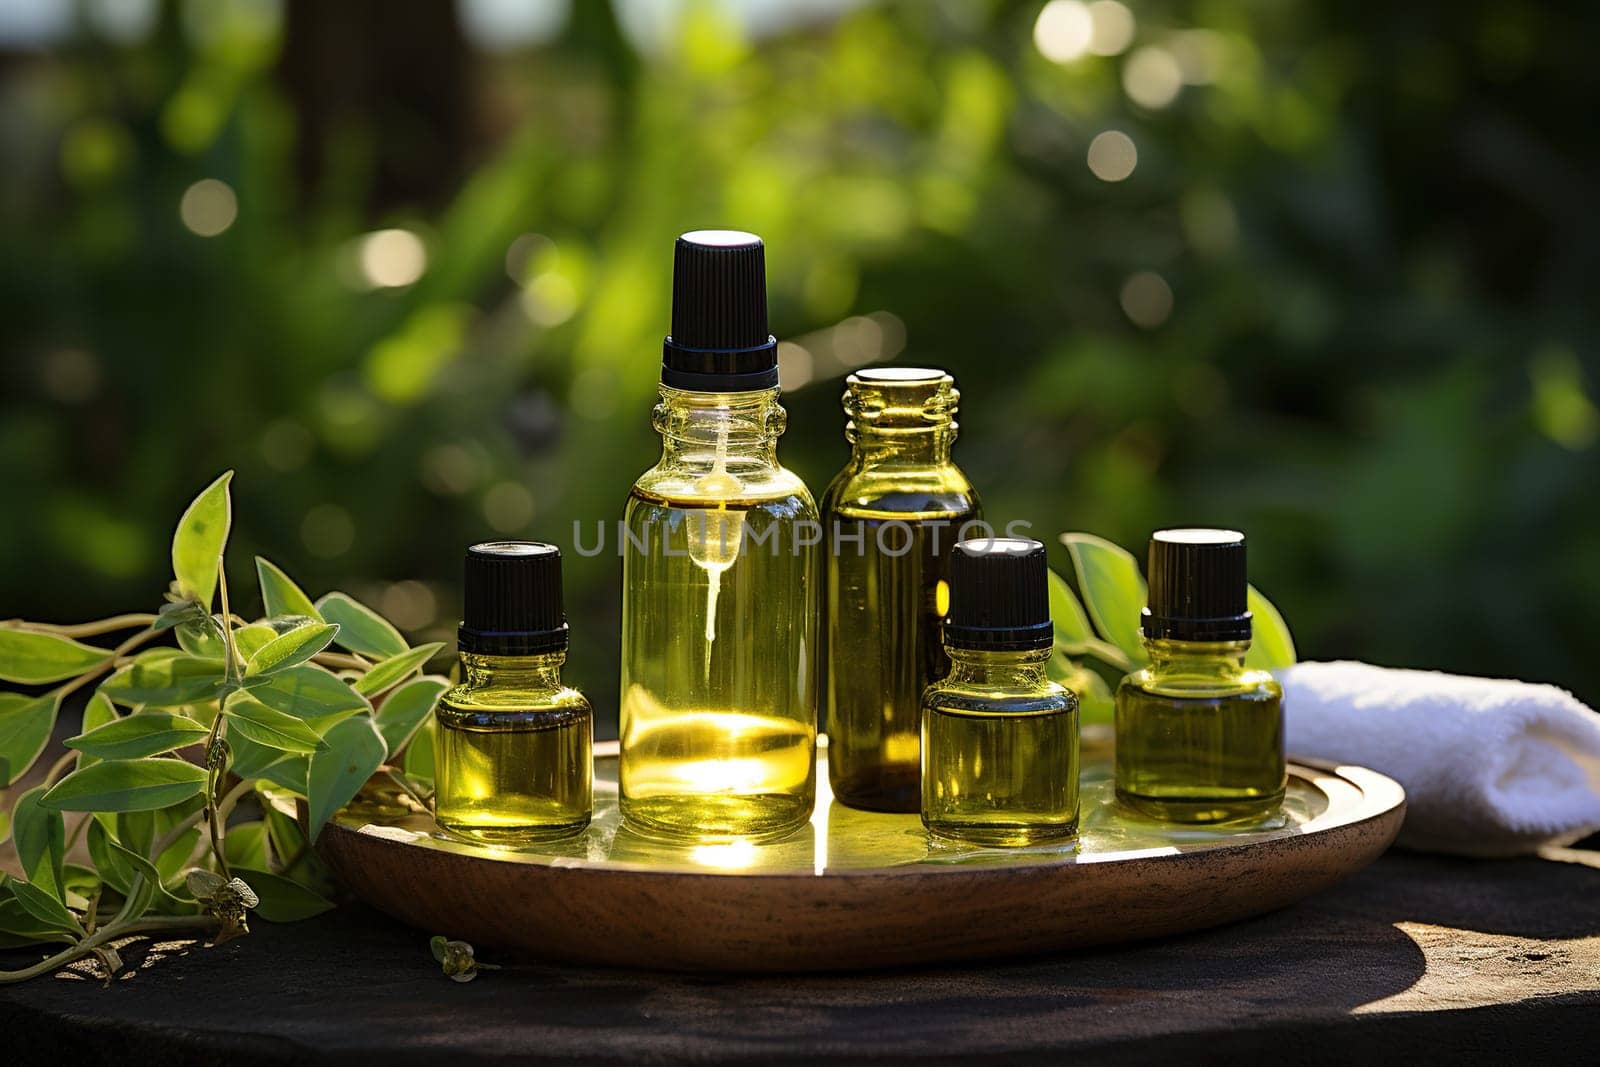 Small bottles with aromatic oils on a wooden stand against a background of blurred nature.